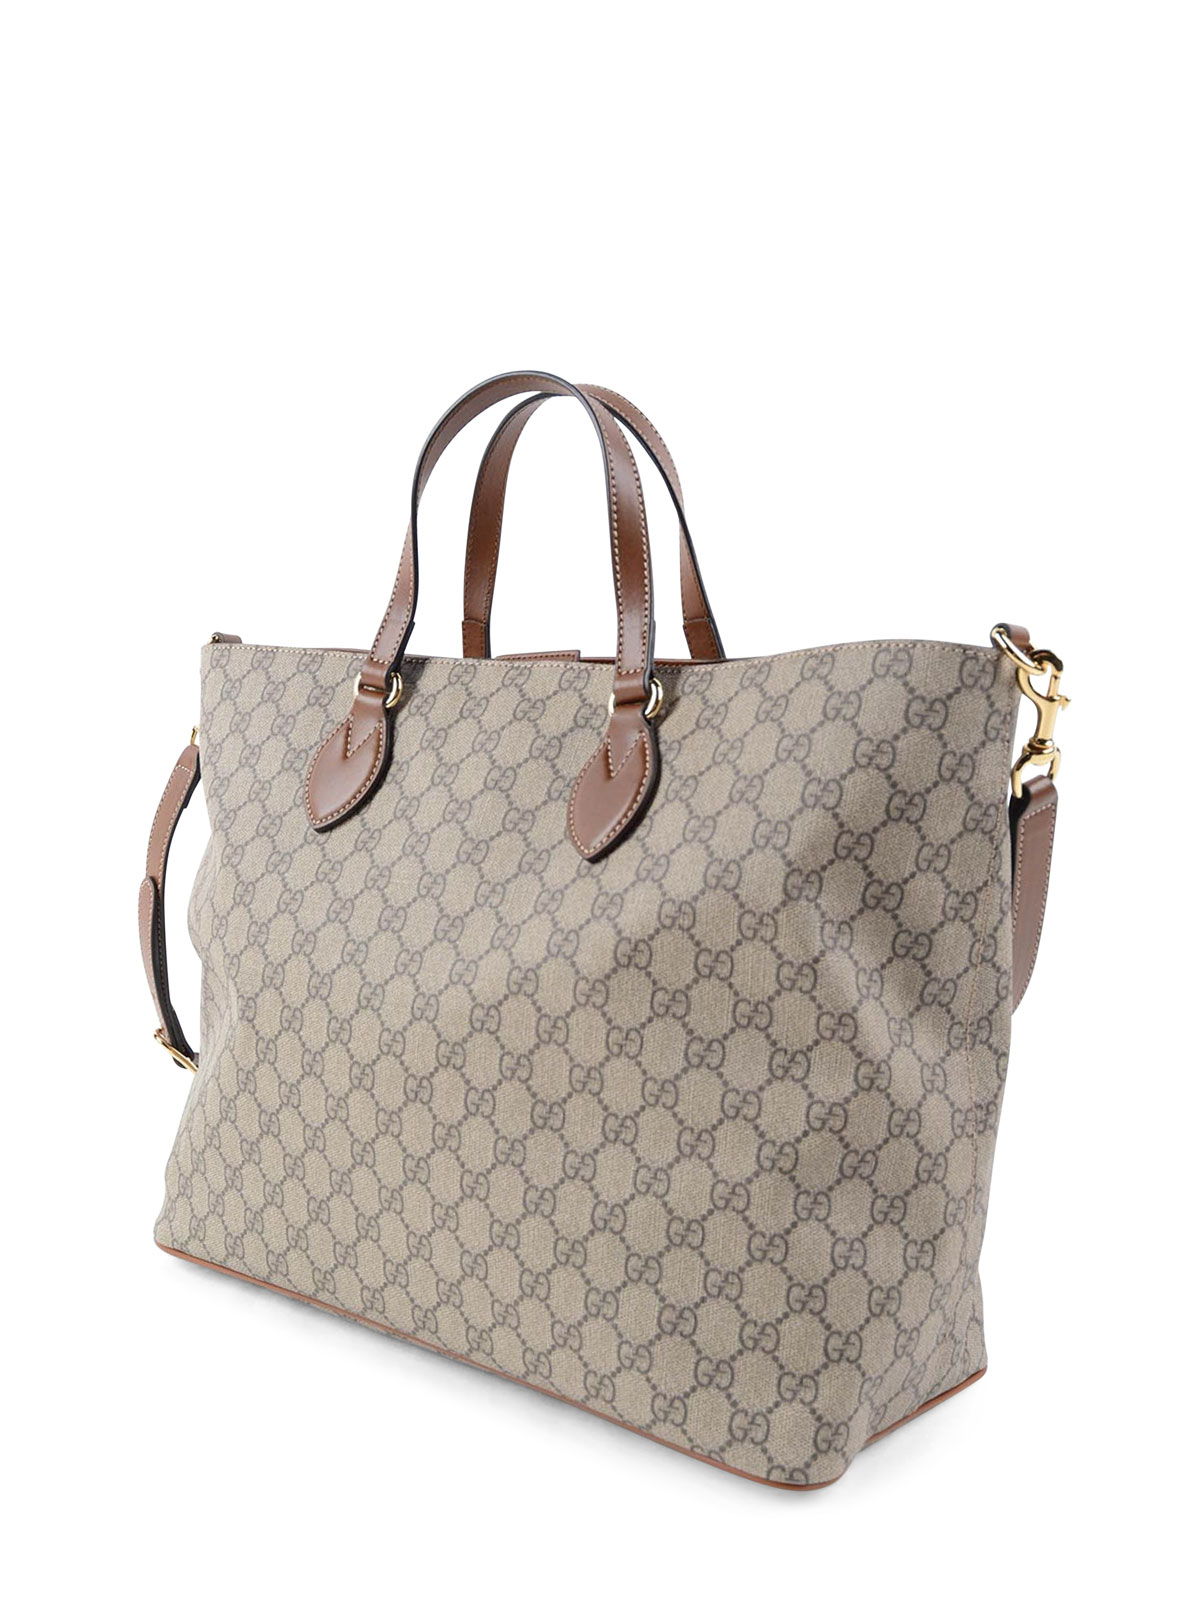 GG Supreme canvas tote bag by Gucci - totes bags | Shop online at www.ermes-unice.fr